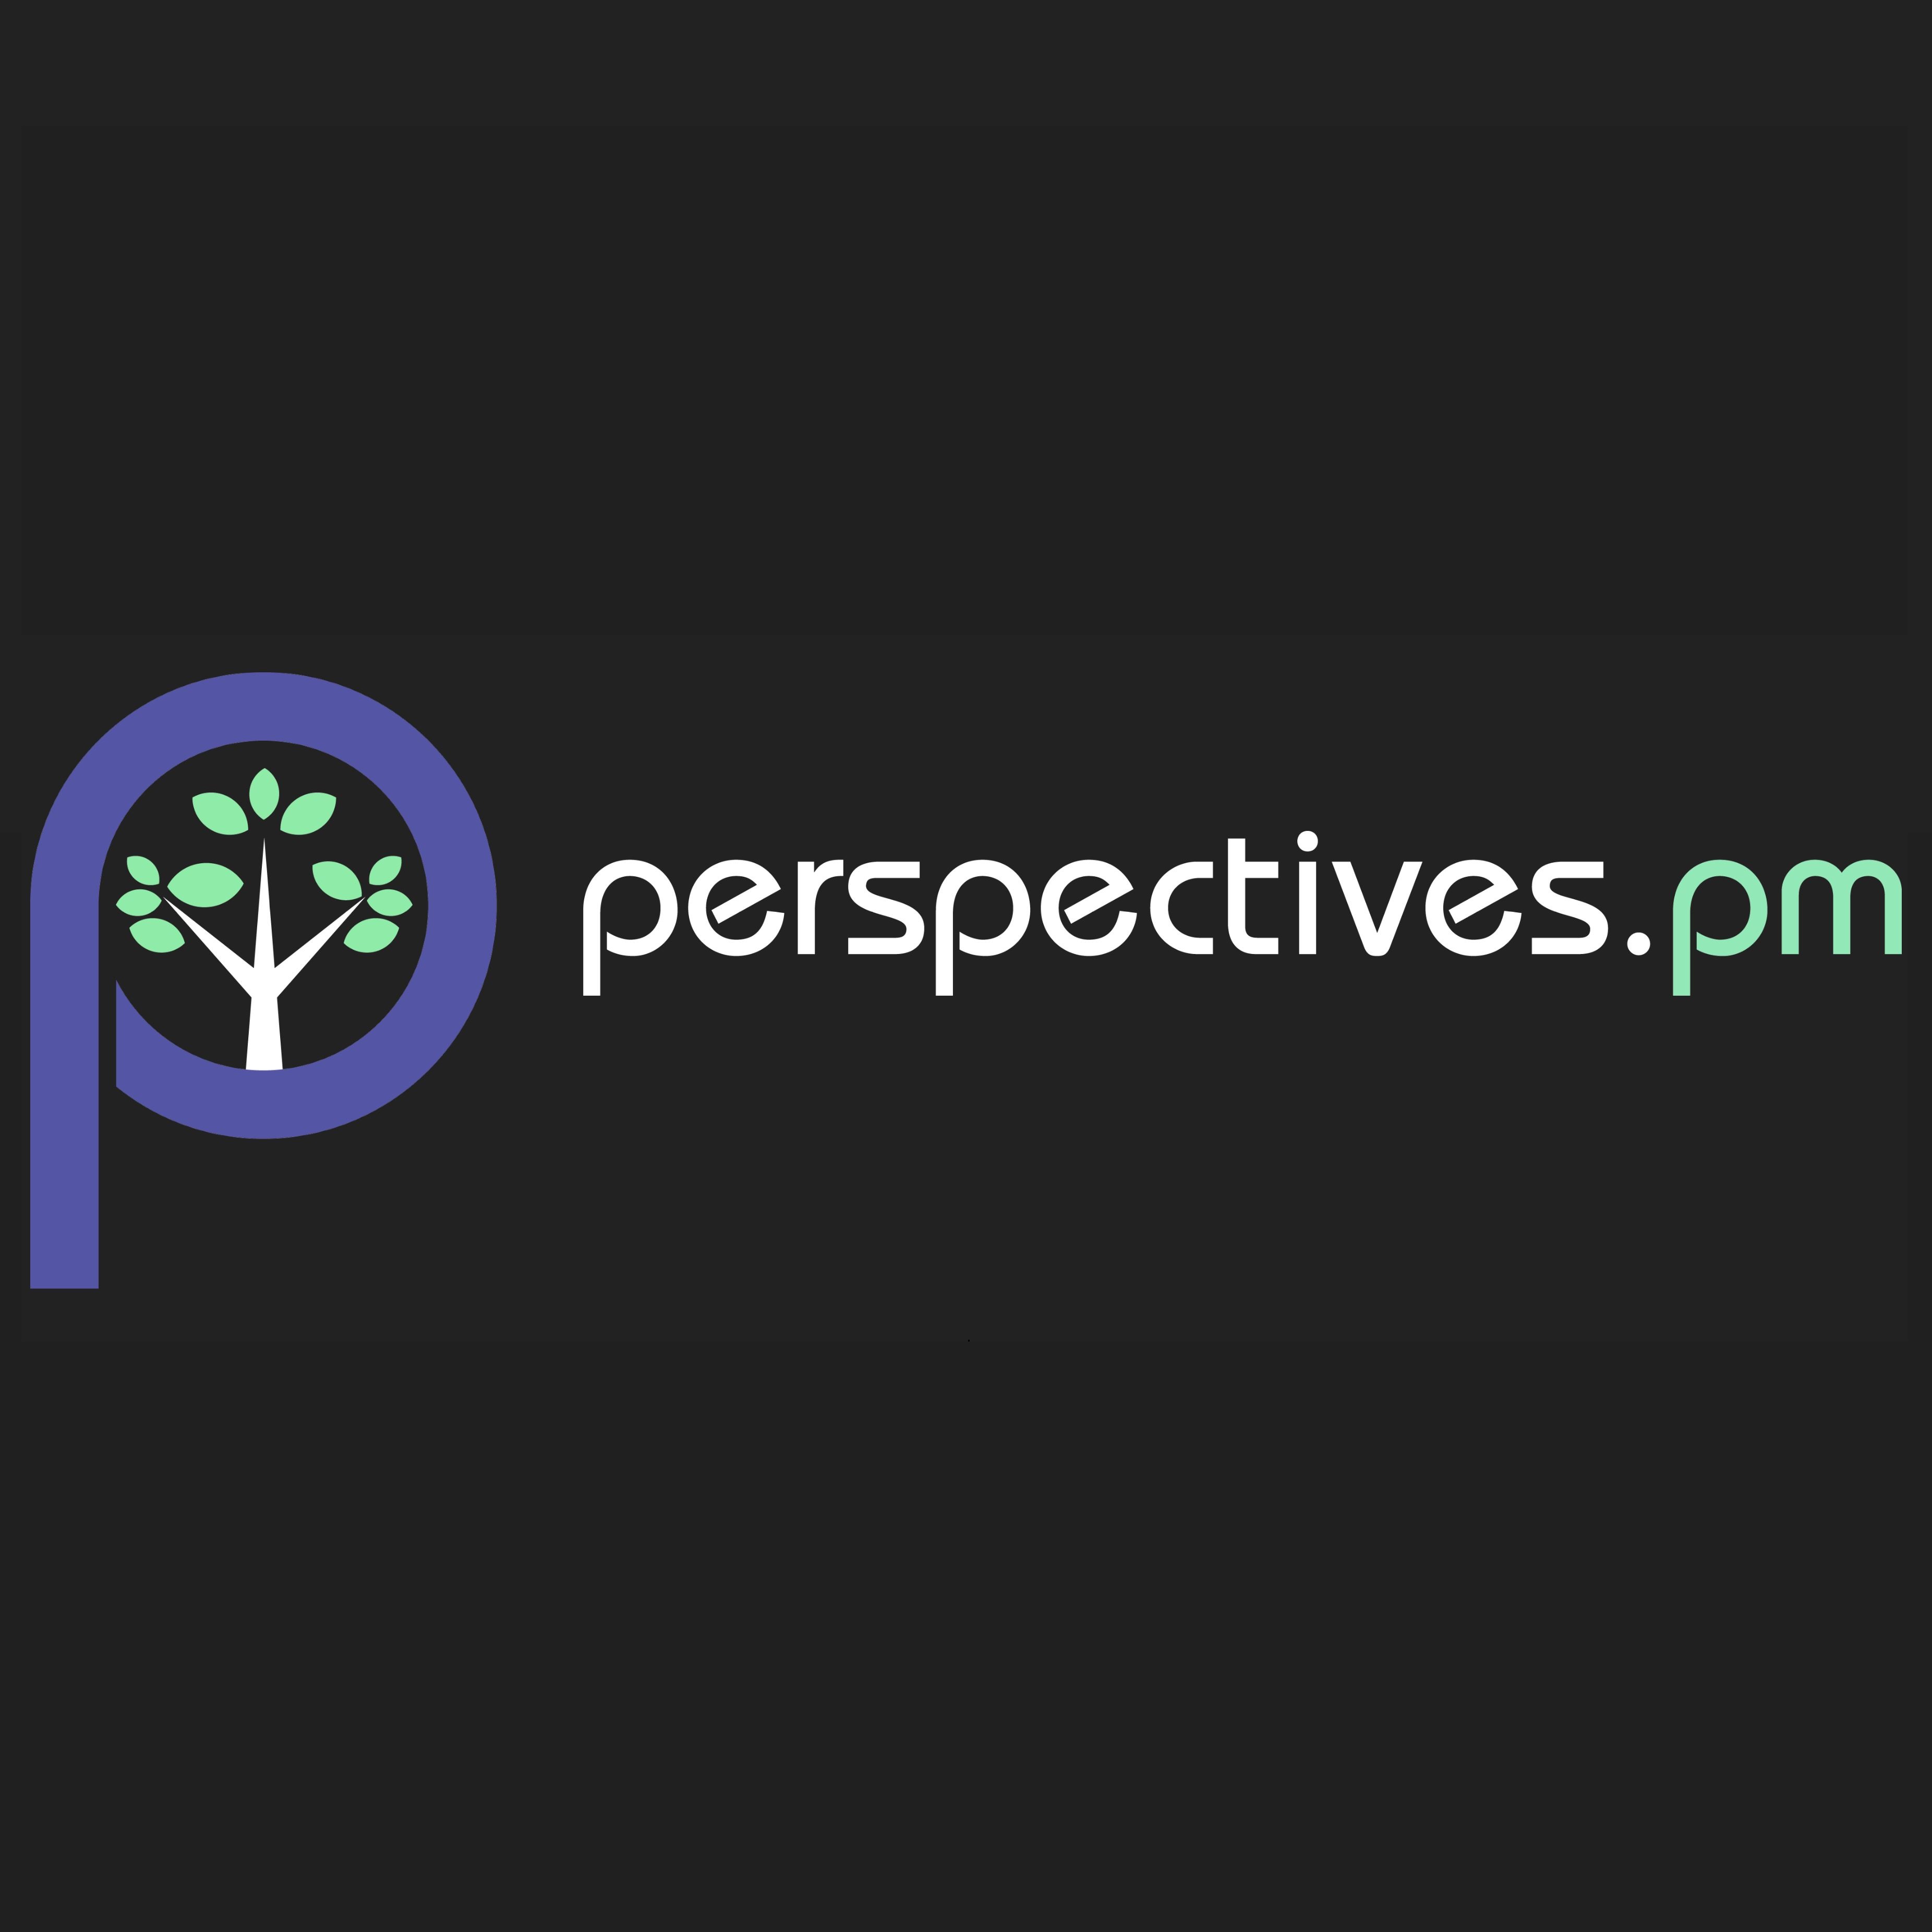 Perspectives.pm - Logo